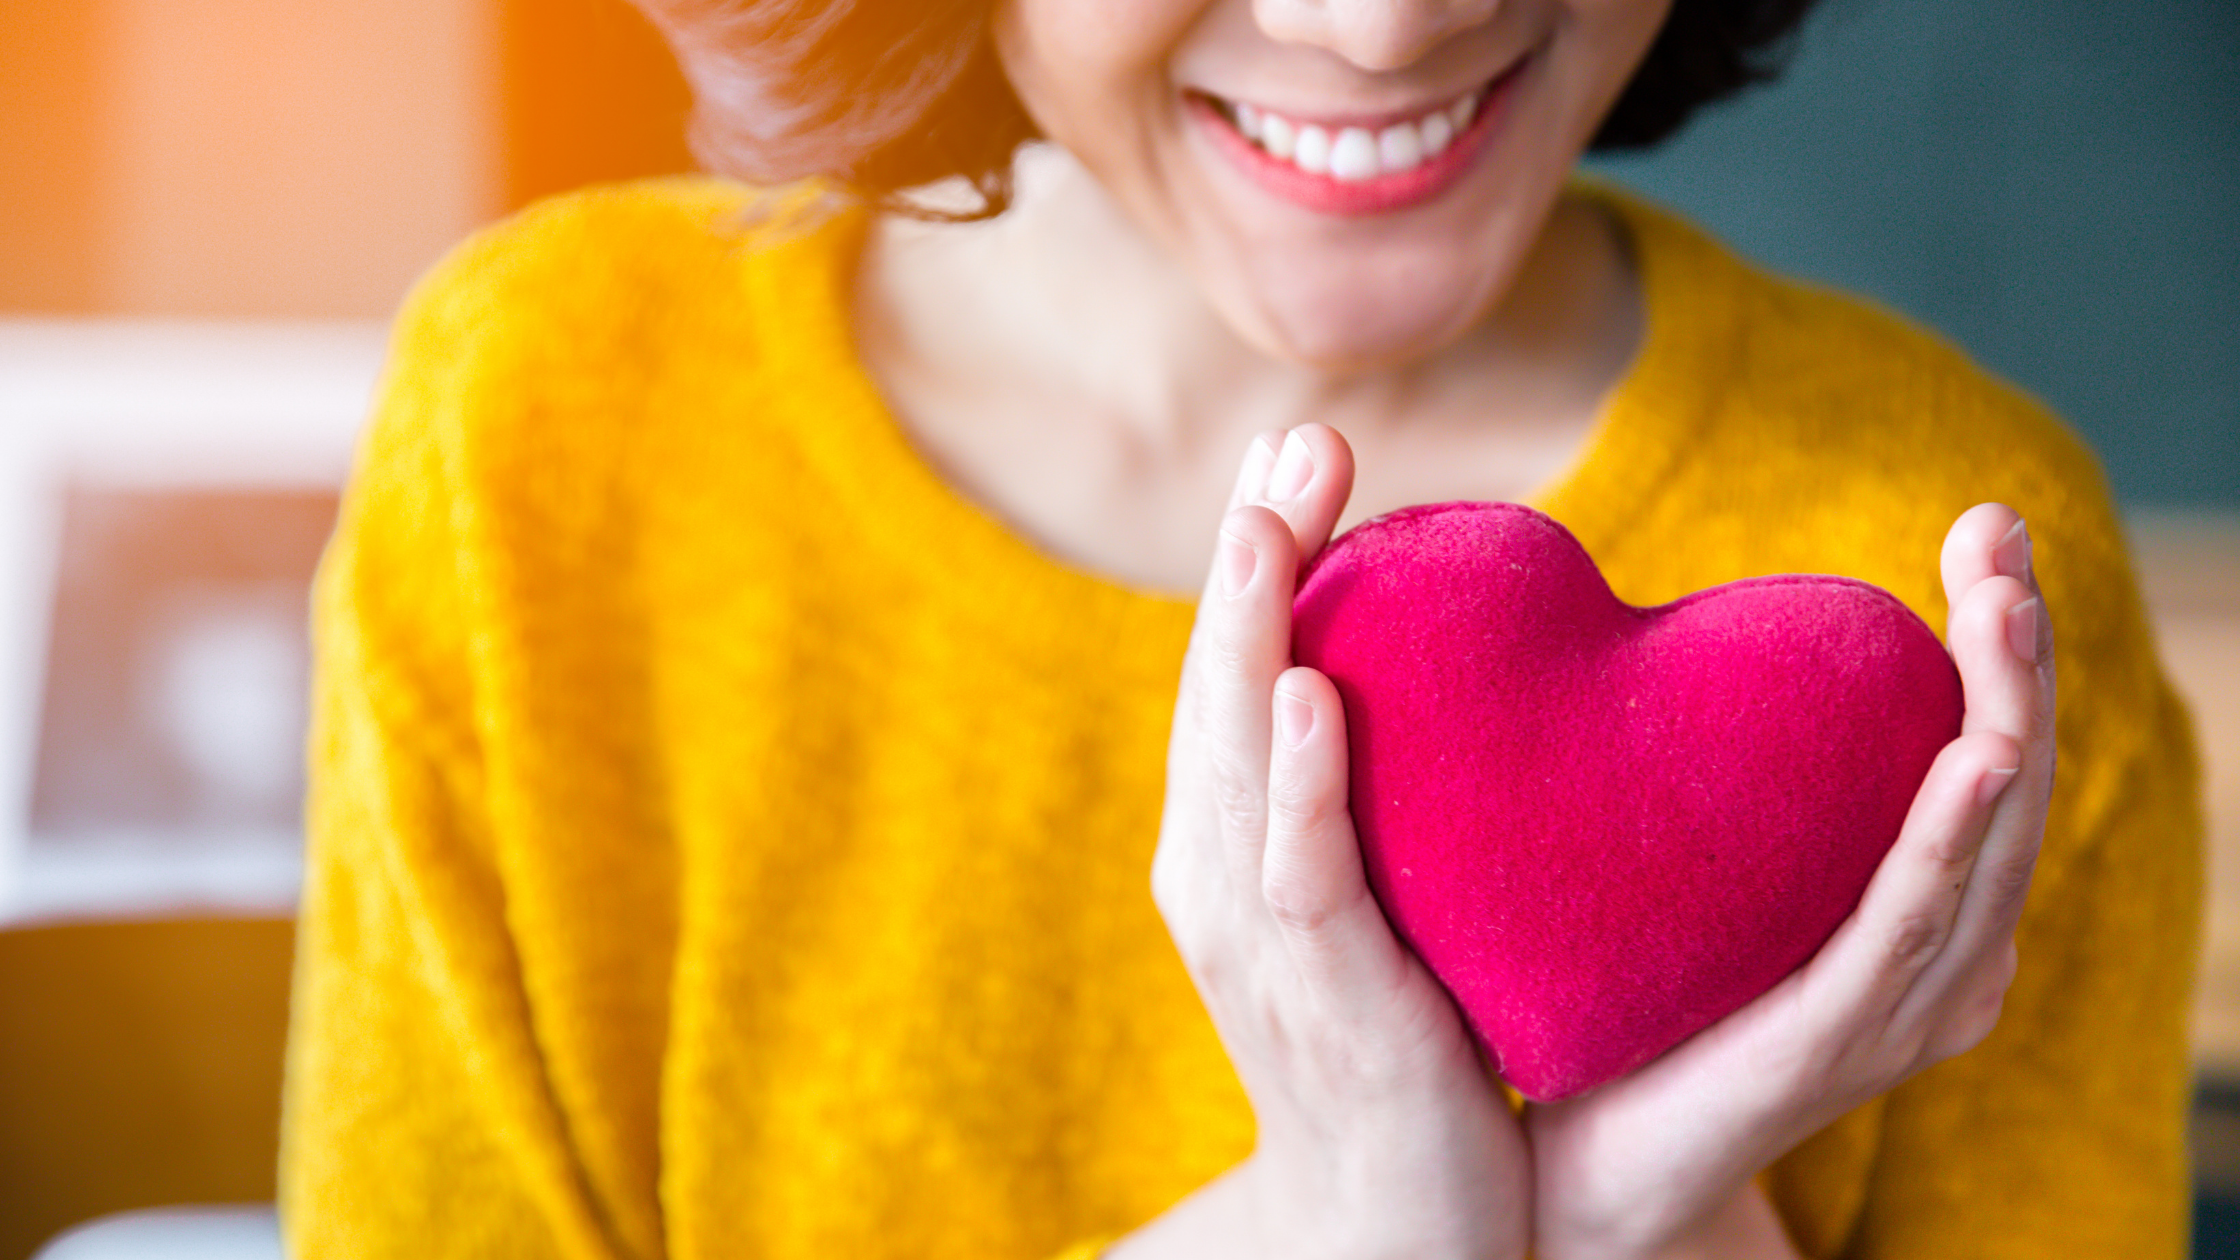 Woman looking at a healthy heart